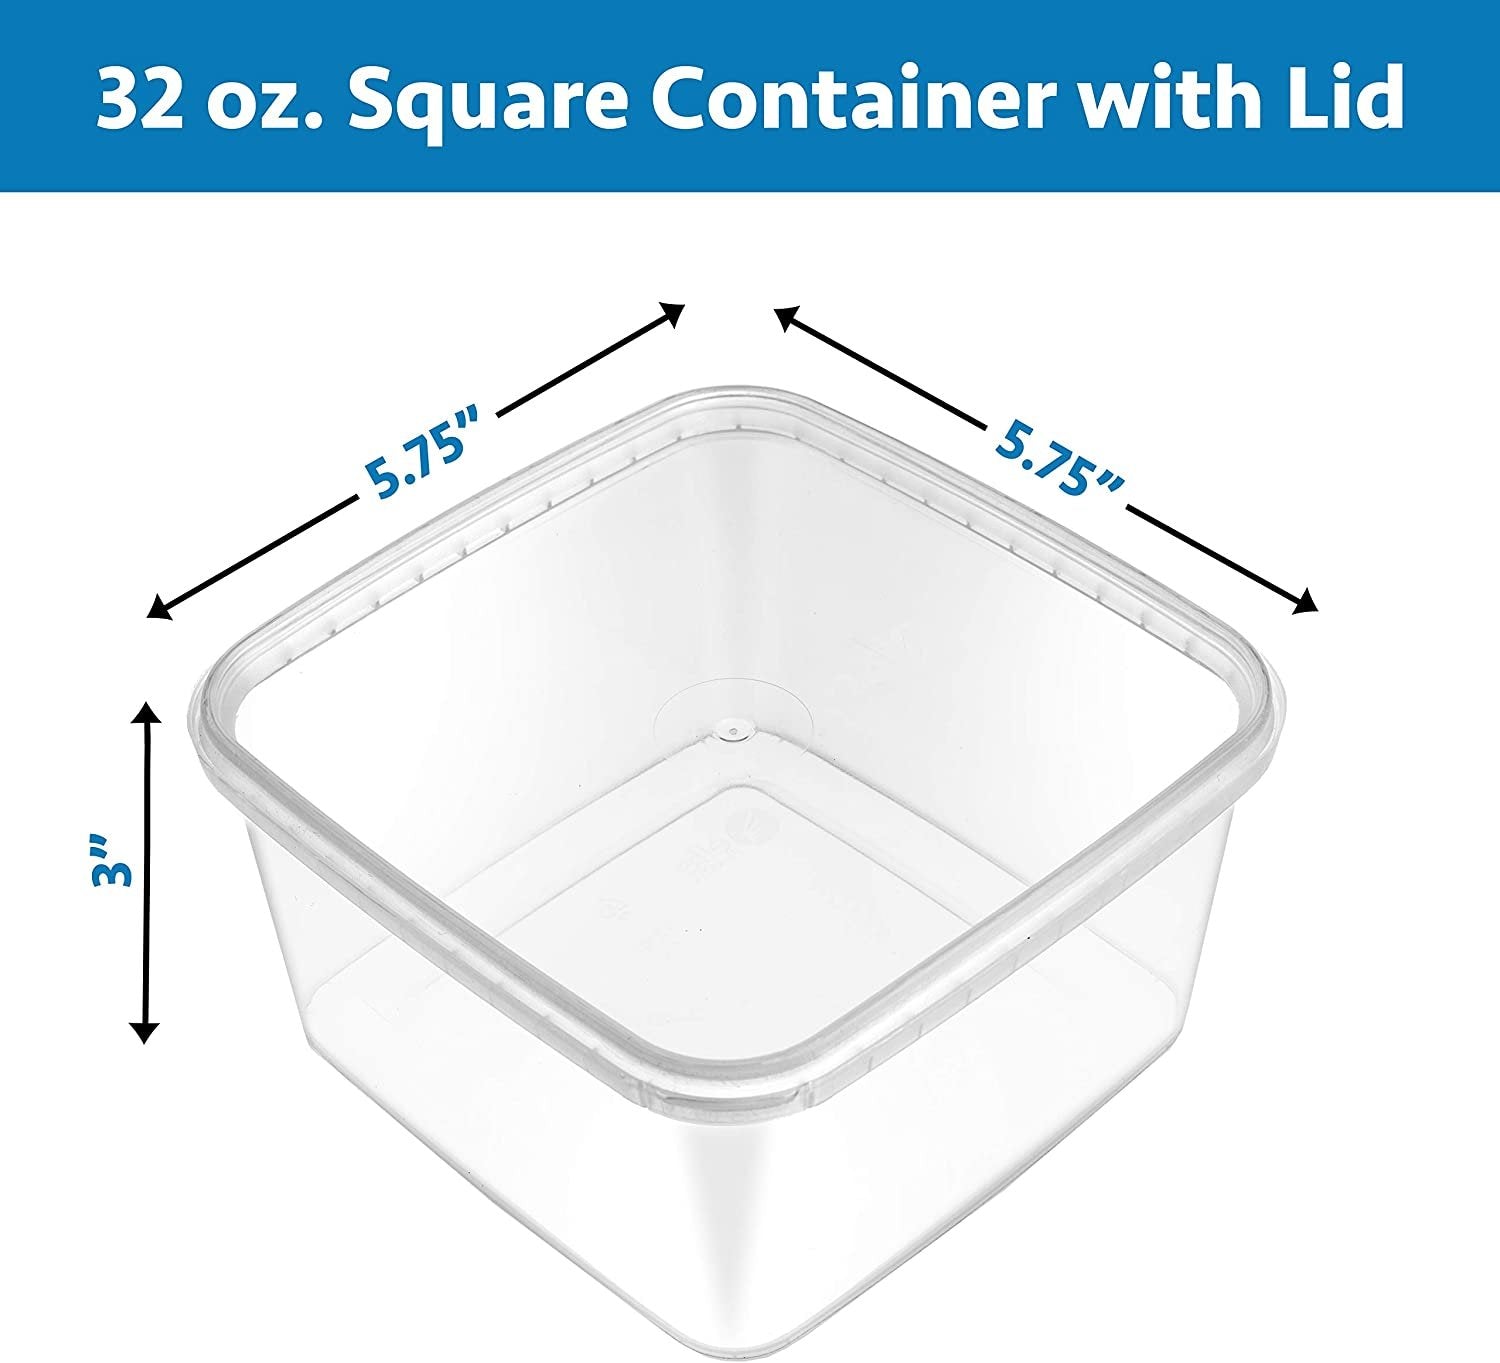 32-oz. Square Clear Deli Containers with Lids | Stackable, Tamper-Proof BPA-Free Food Storage Containers | Recyclable Space Saver Airtight Container for Kitchen Storage, Meal Prep, Take Out | 20 Pack - NY-HI